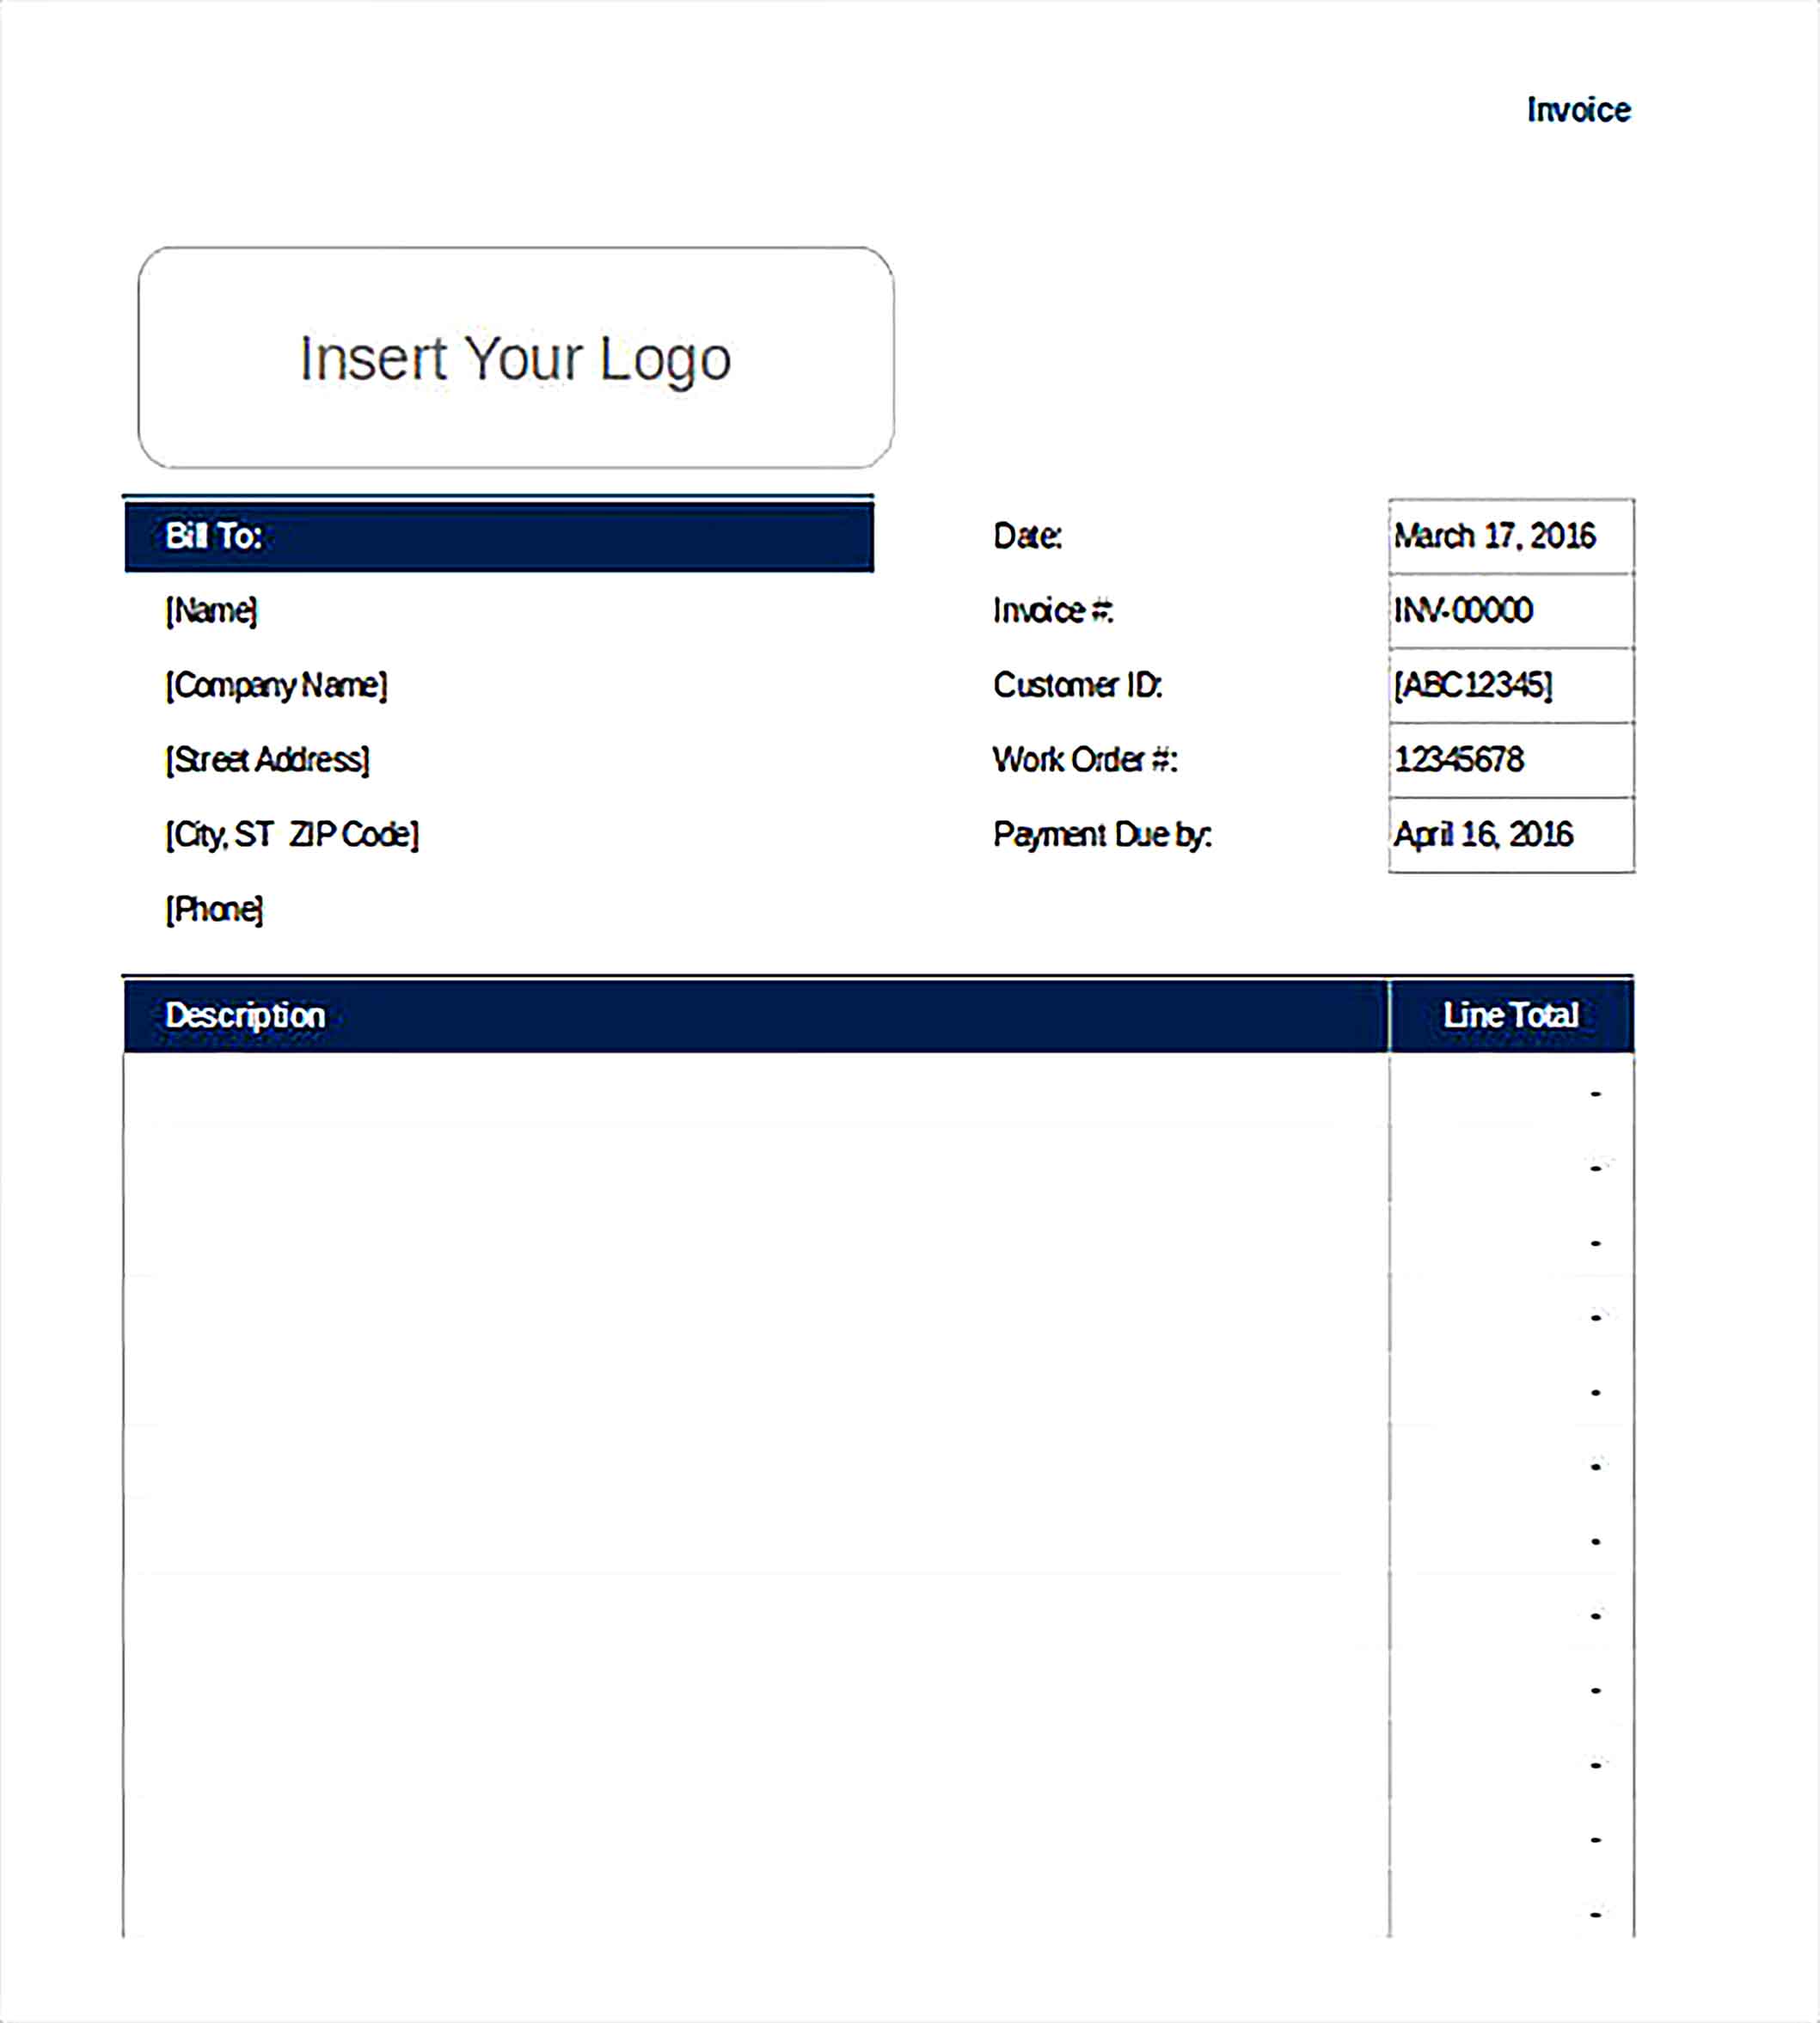 Service Invoice Tracking Inventory Template